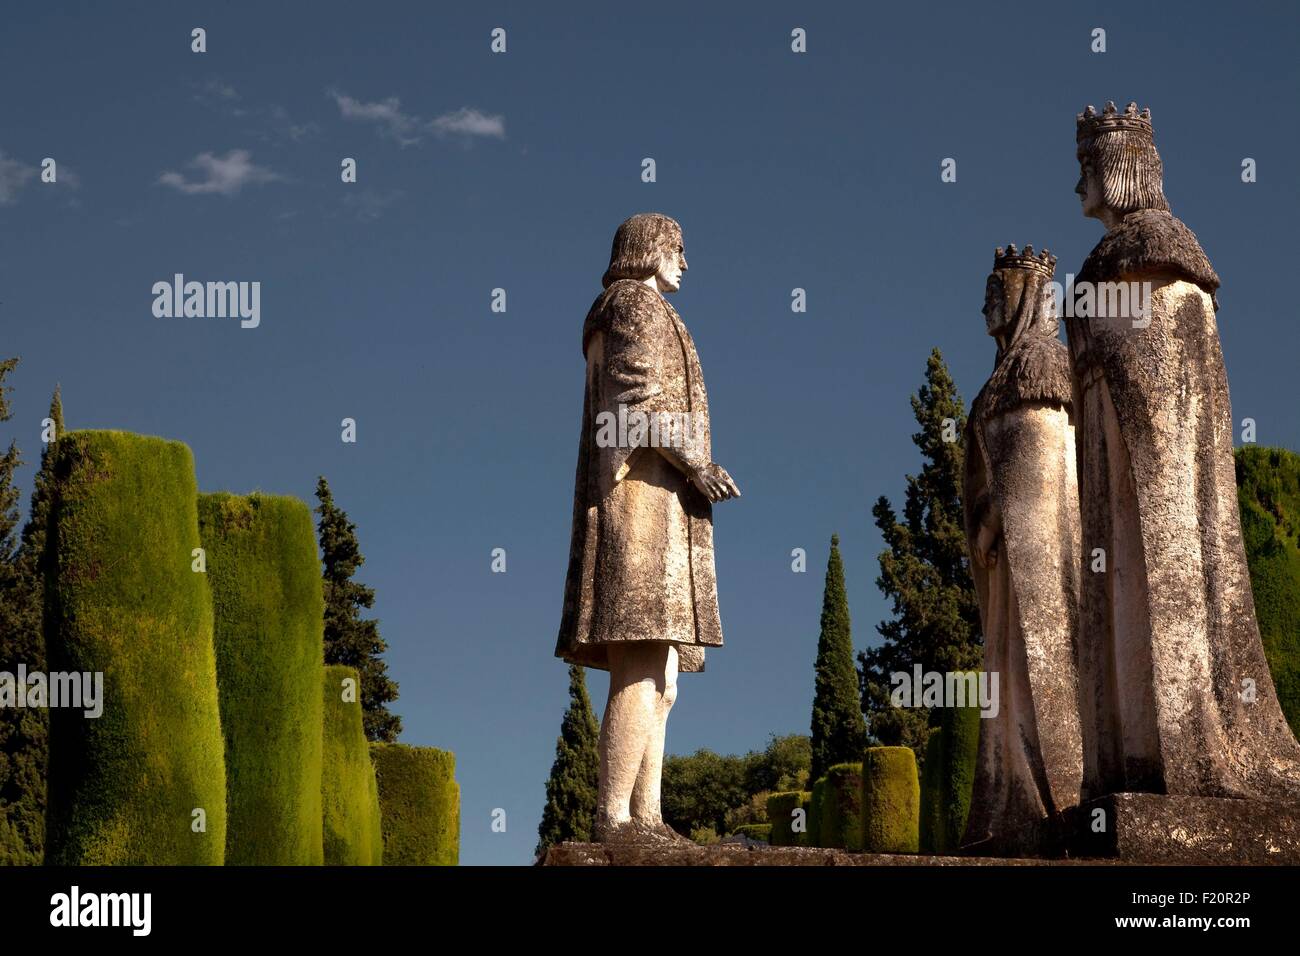 Spain, Andalusia, Cordoba, Historical Centre listed as World Heritage by UNESCO, Alcßzar de los Reyes Cristianos, Alcazar of the Christian Monarchs' gardens, Statues of the Catholic Kings talking to Christopher Columbus about the discovery of America Stock Photo